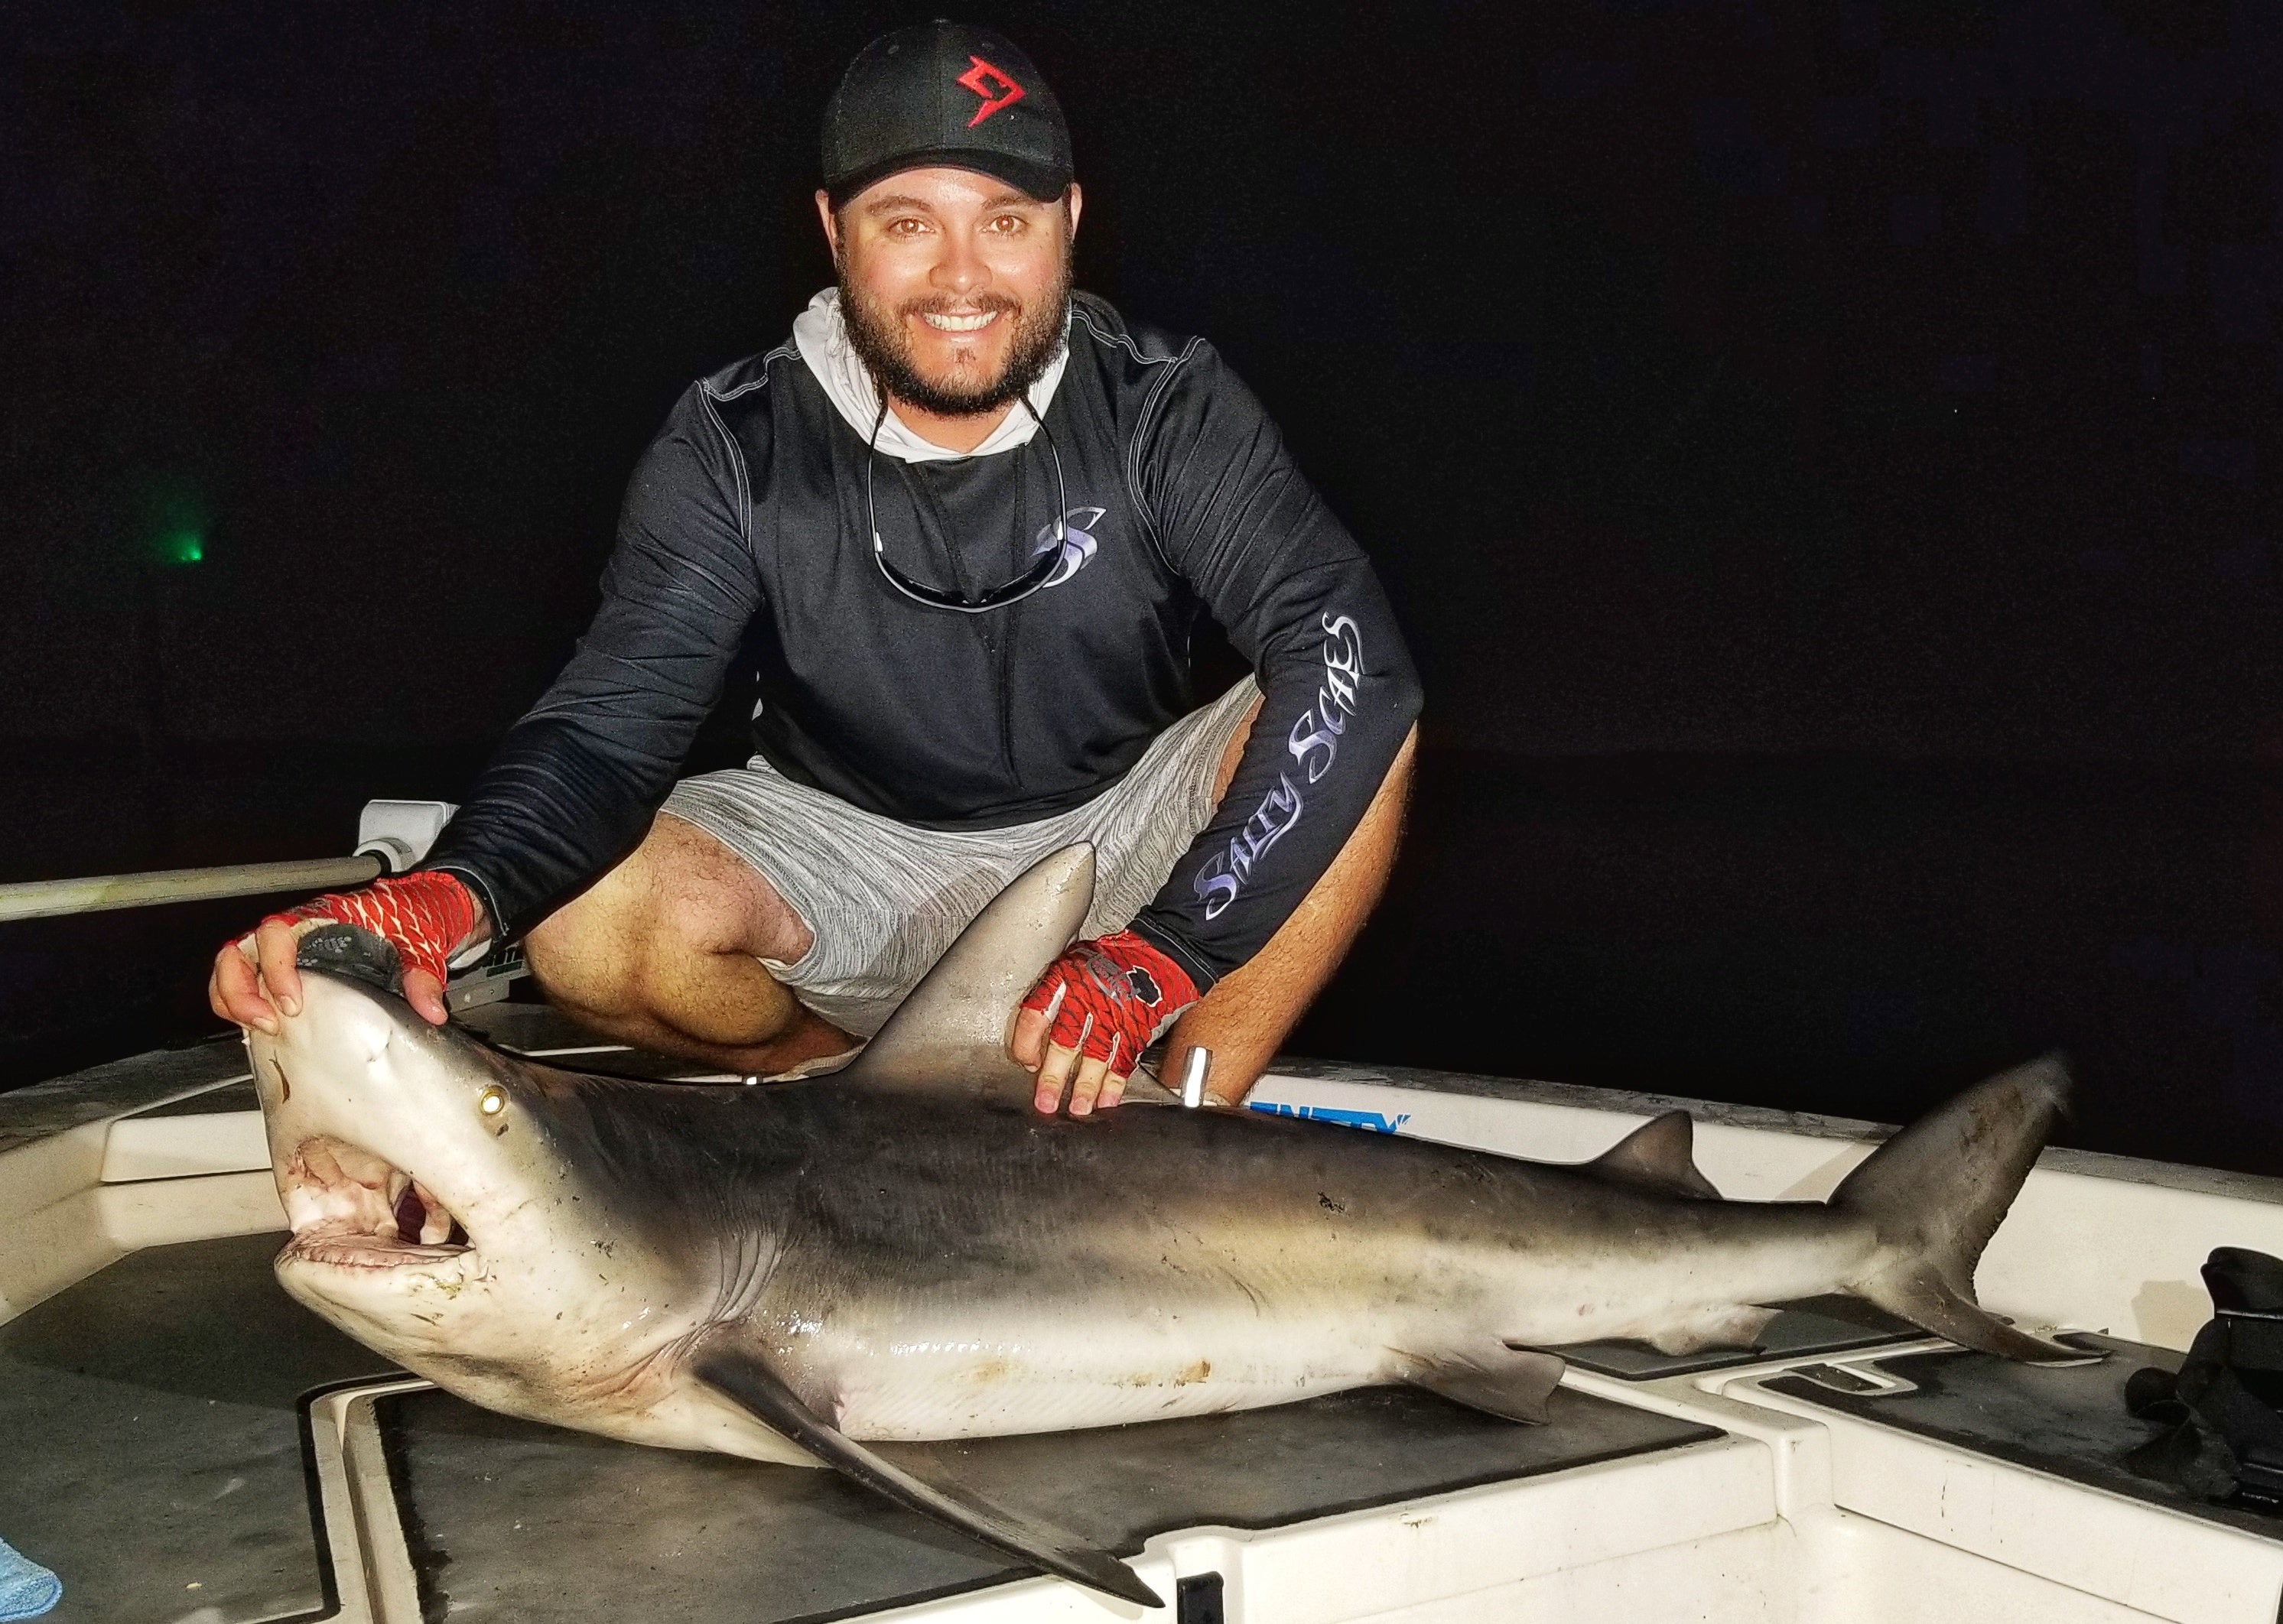 Winter Shark Fishing - How to Be Successful